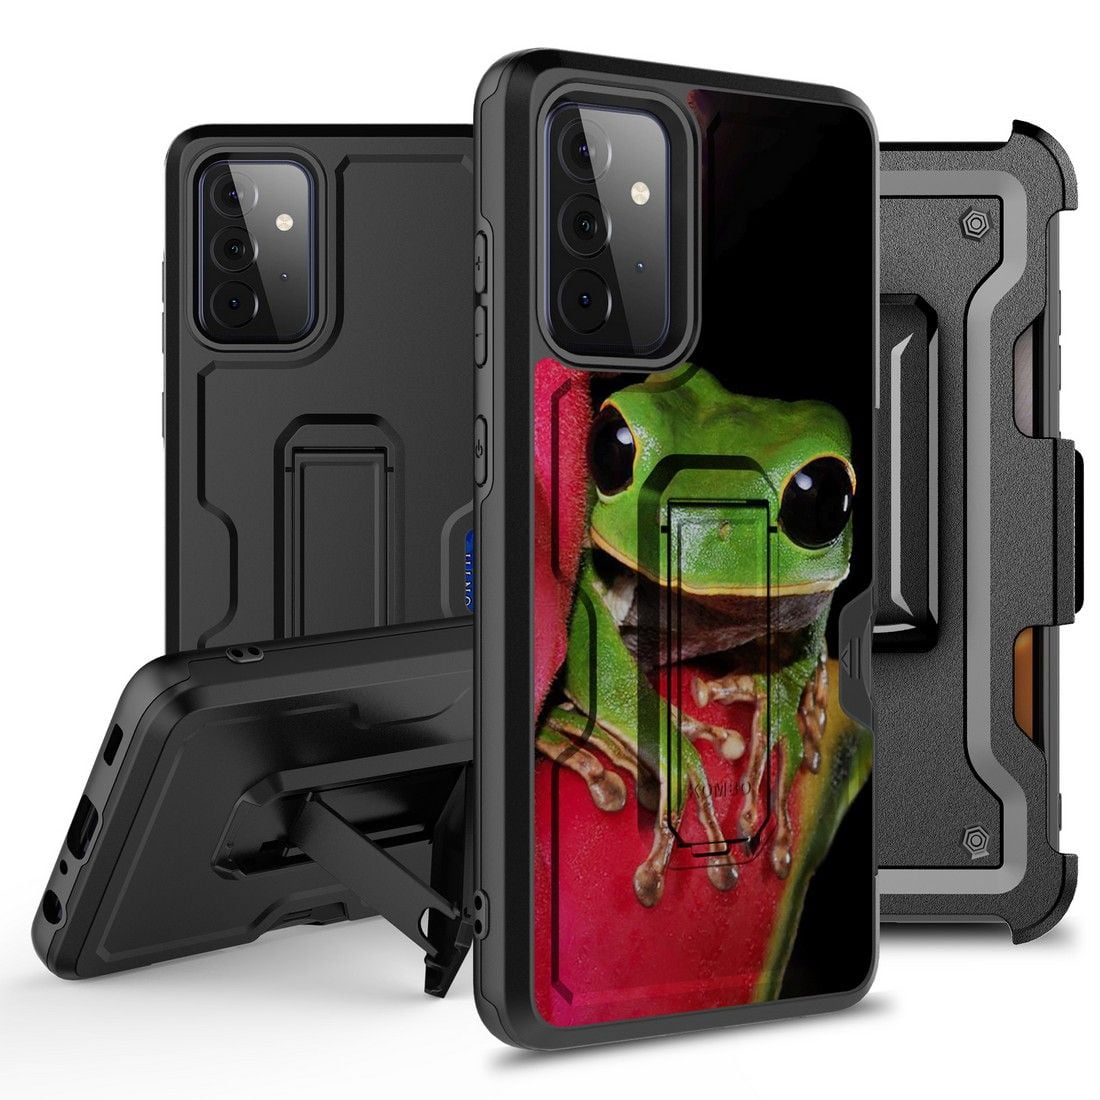 Bemz Armor Kombo Series for Samsung Galaxy A52 5G Case (Heavy Duty Rugged  Kickstand Cover with Belt Clip Holster) with Touch Tool - Tropical Green 